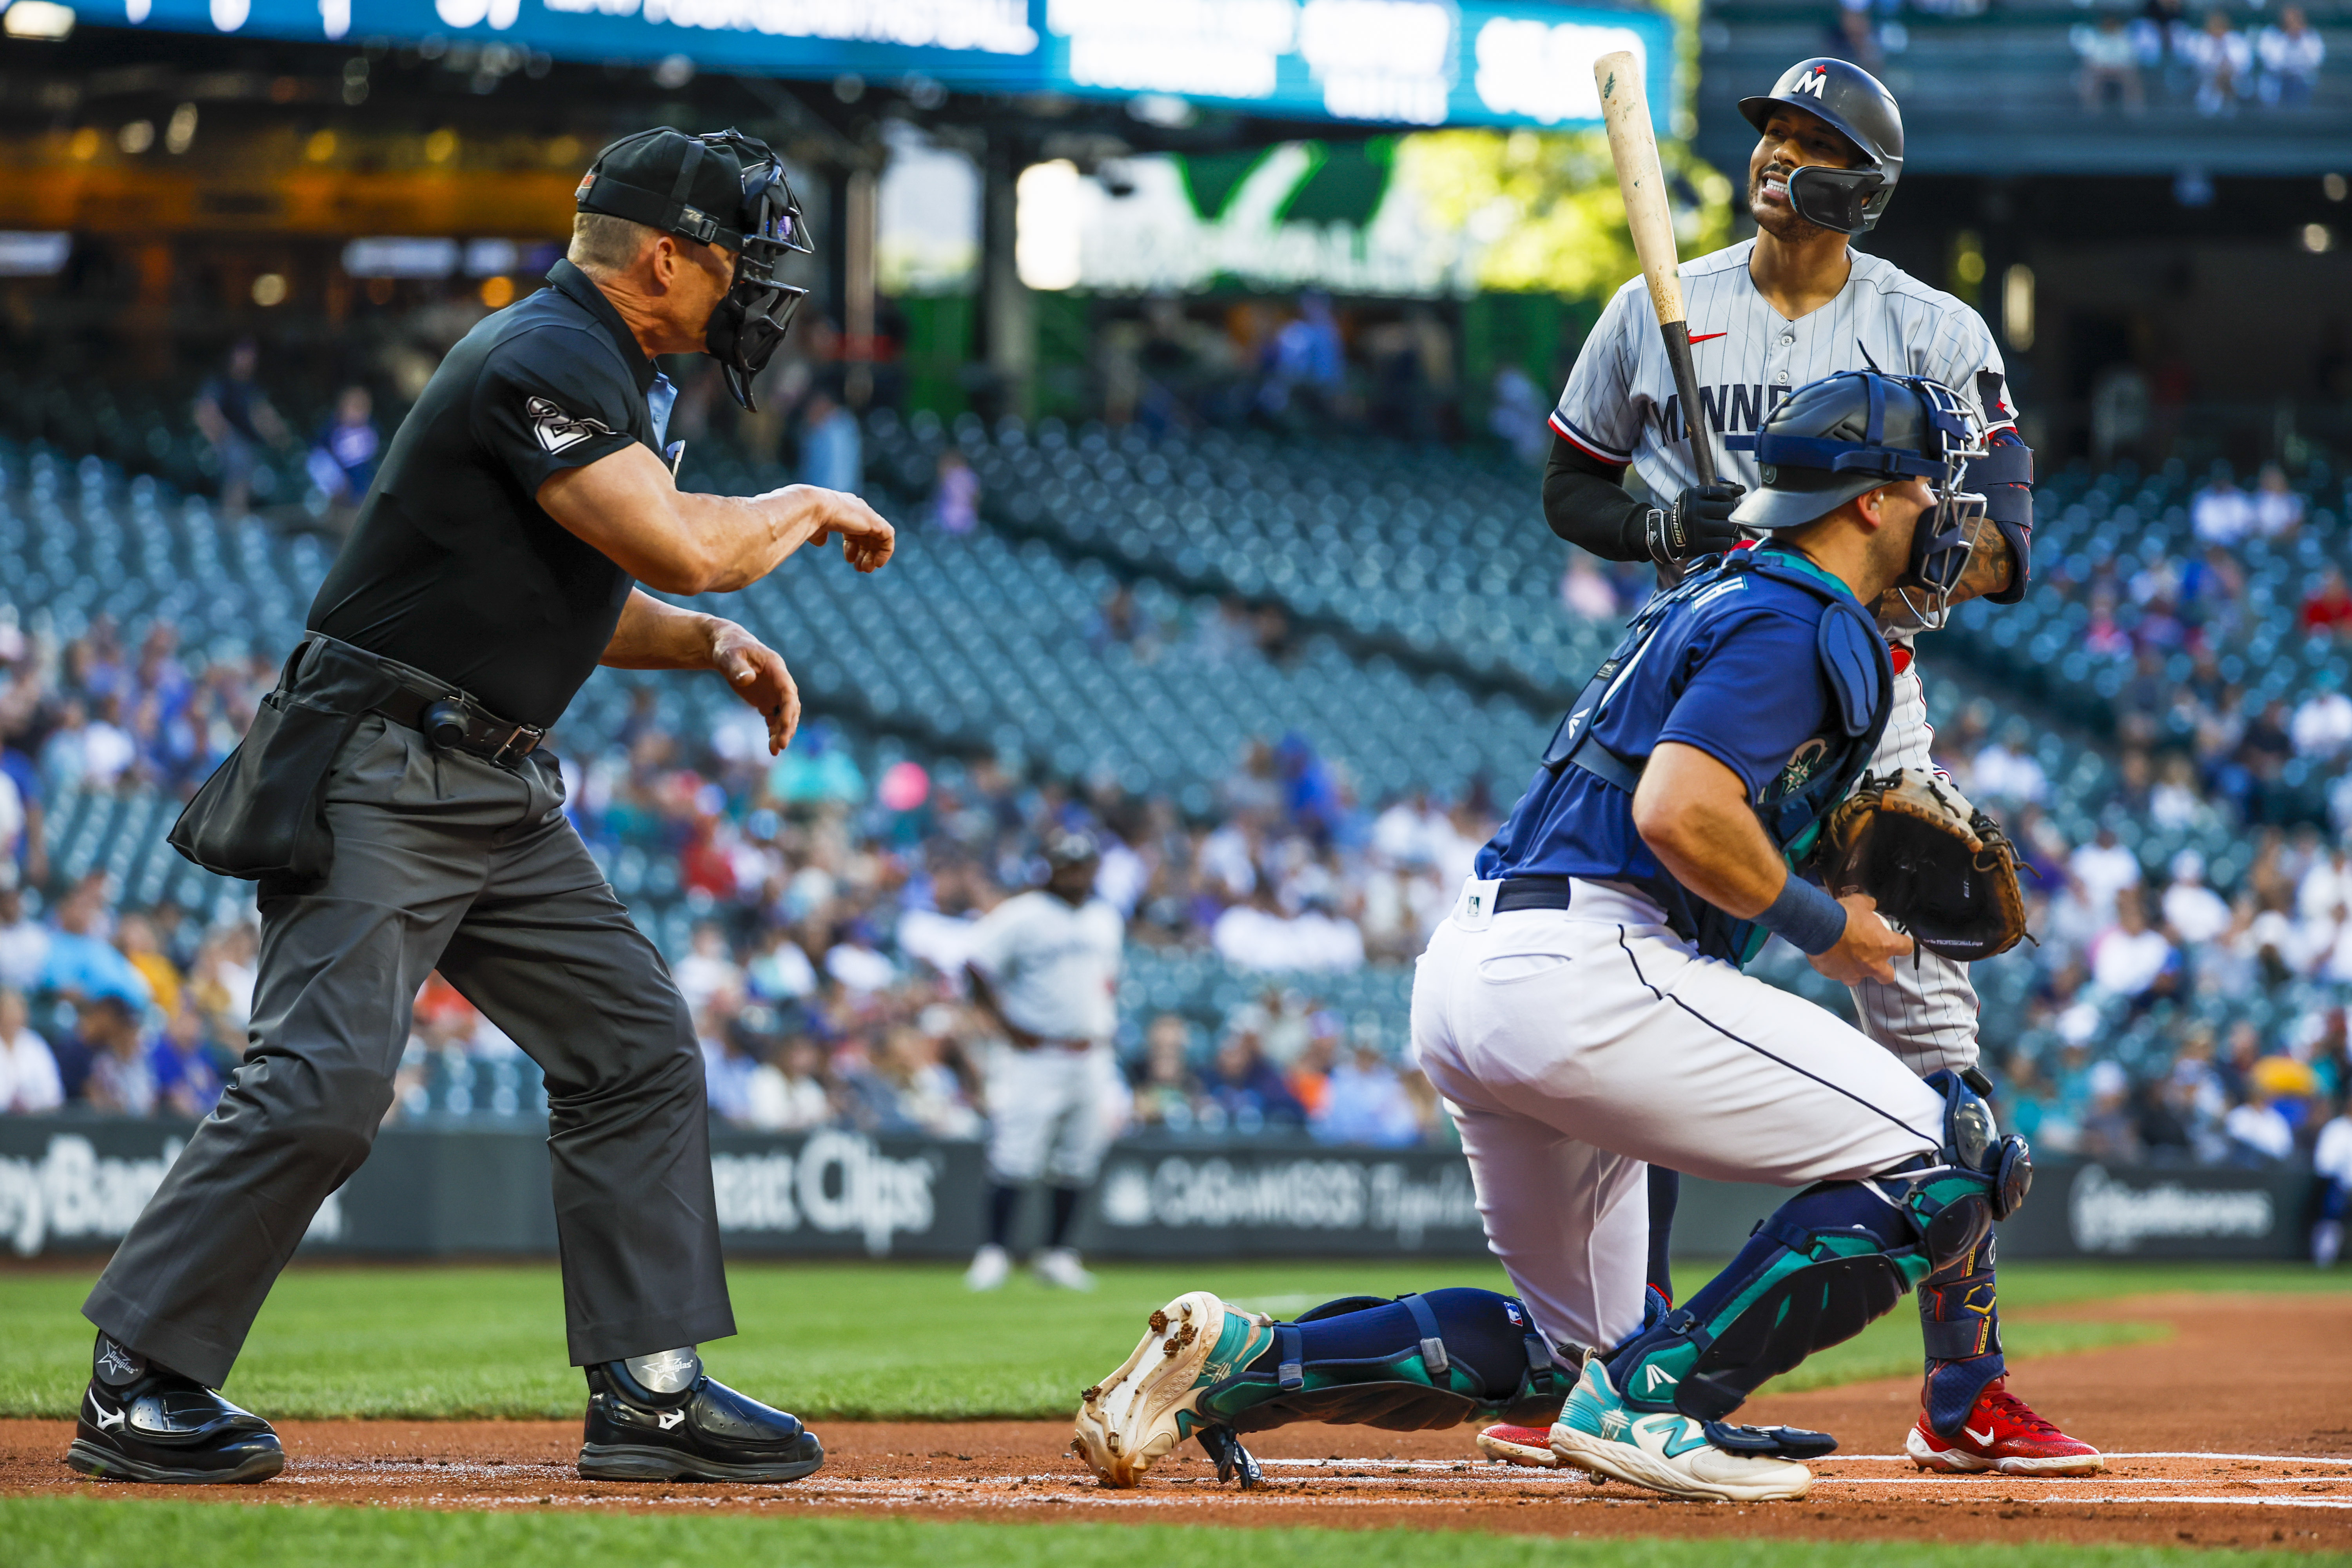 Mariners hold on to capture opener vs. Twins